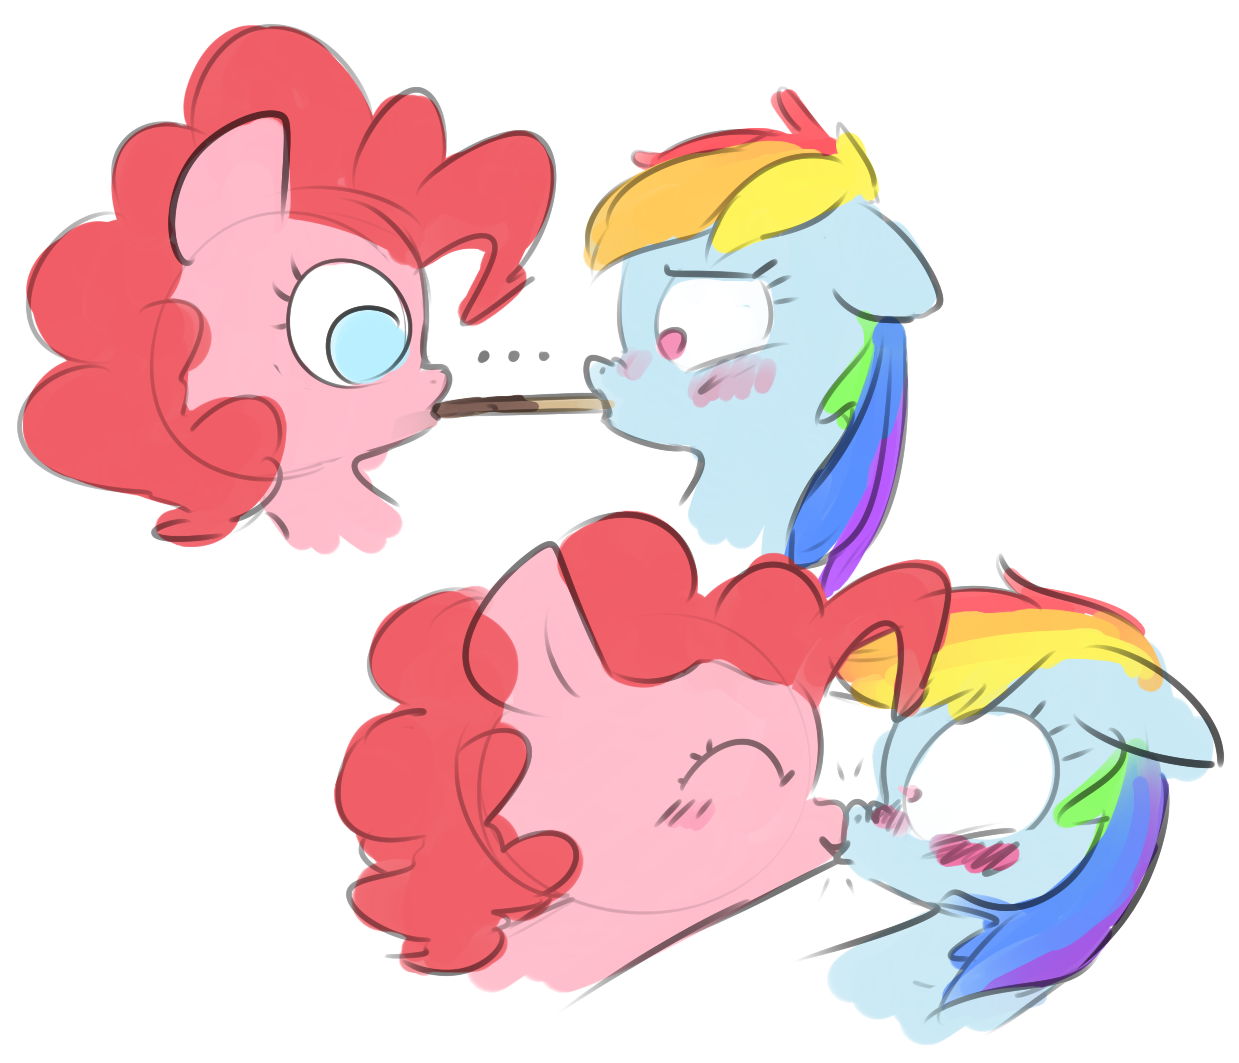 https://derpicdn.net/img/view/2015/9/24/986713__safe_rainbow+dash_pinkie+pie_shipping_blushing_lesbian_floppy+ears_kissing_wide+eyes_embarrassed.png